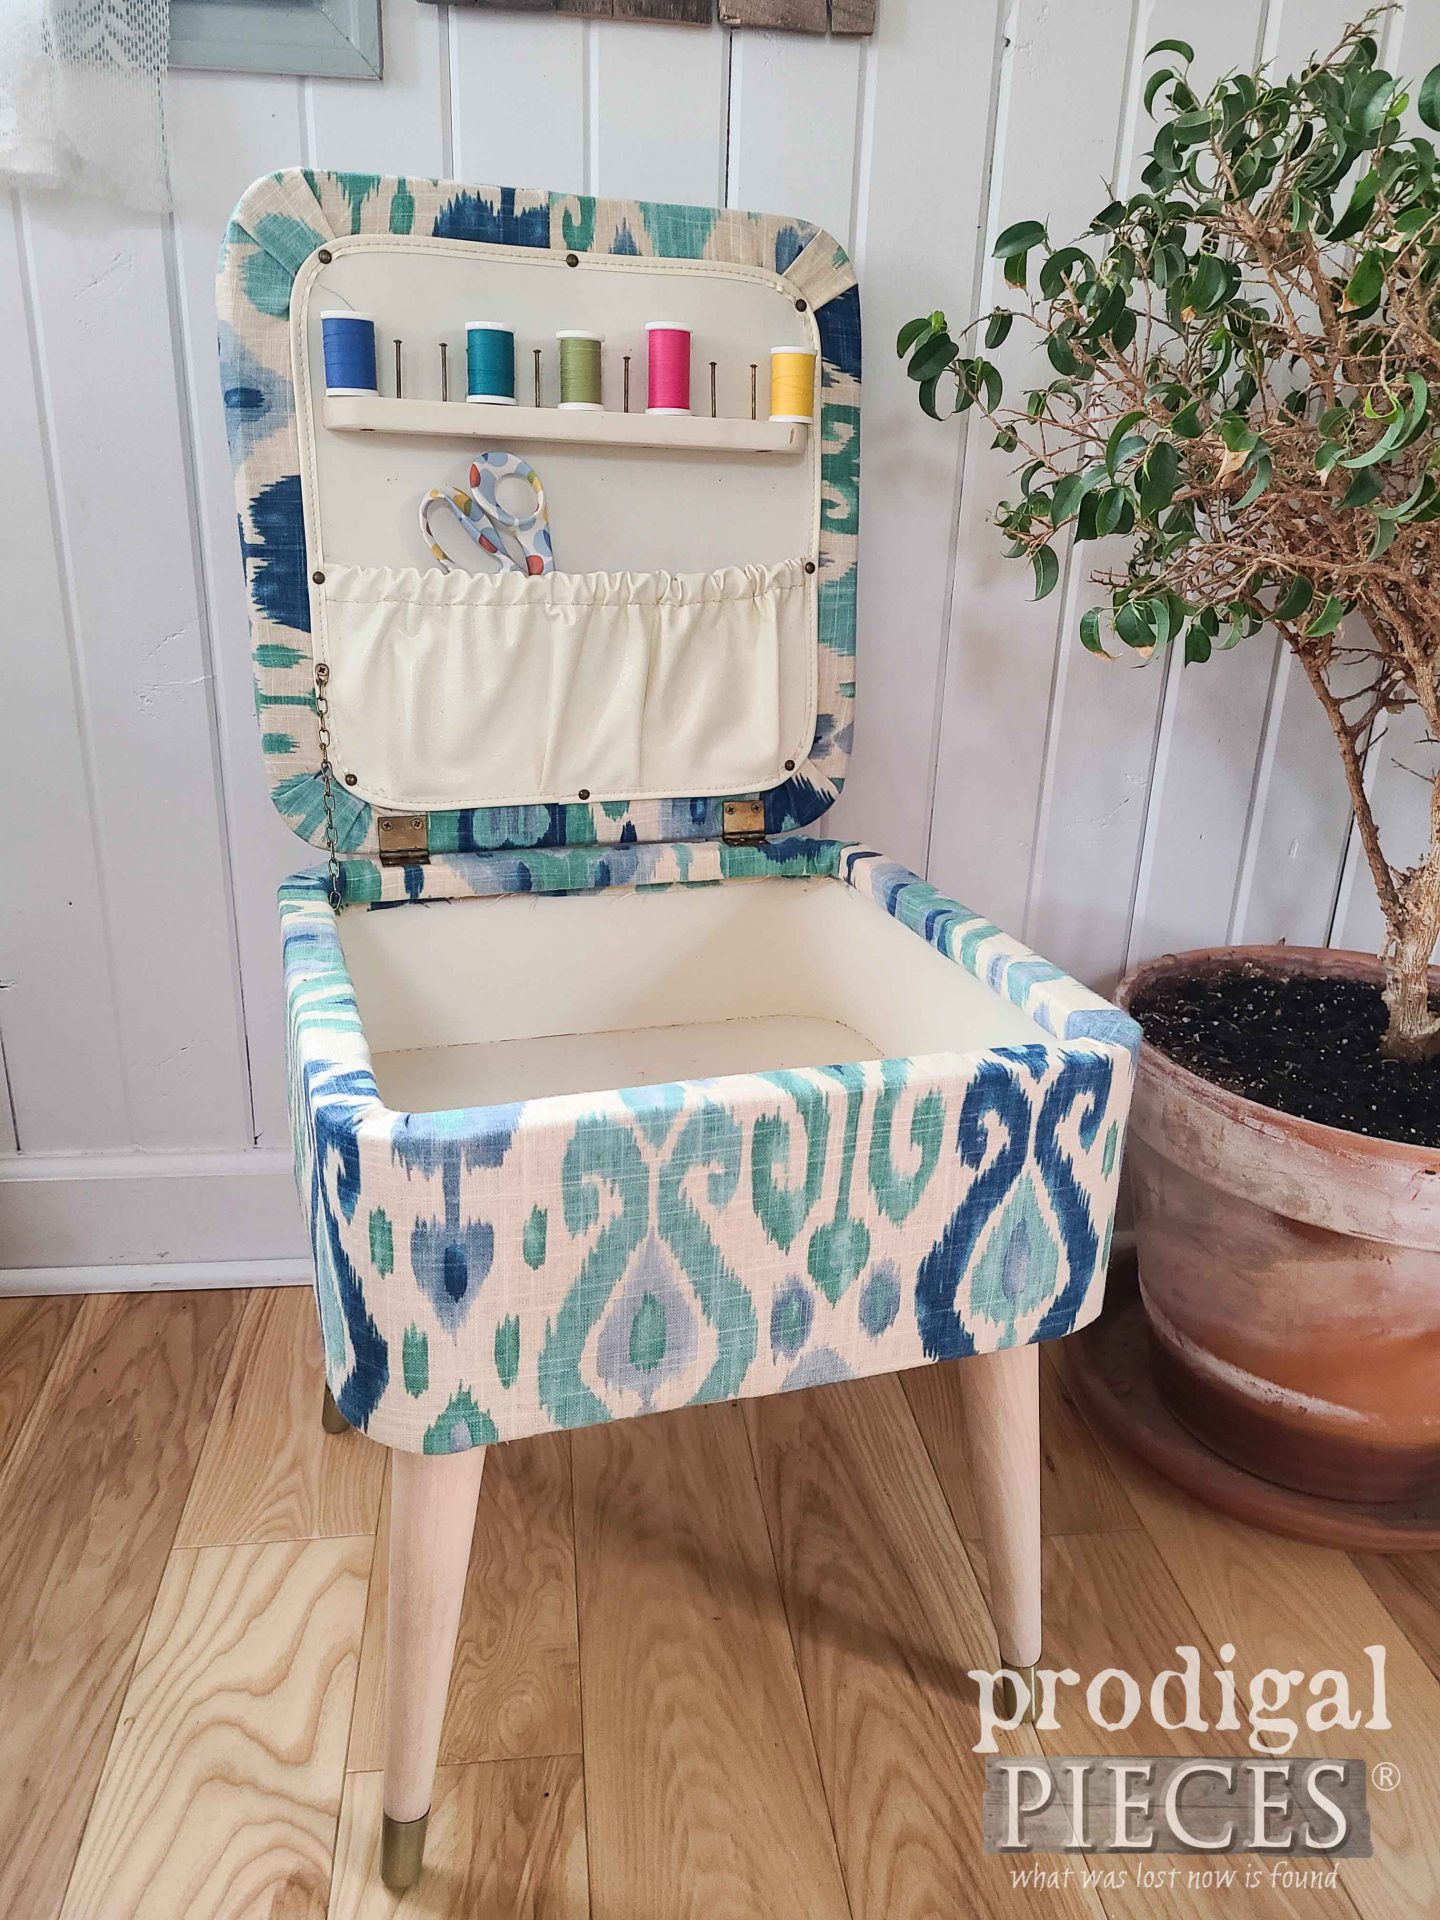 Open Vintage Sewing Stool Lid with Notions by Larissa of Prodigal Pieces | prodigalpieces.com #prodigalpieces #sewing #diy #vintage